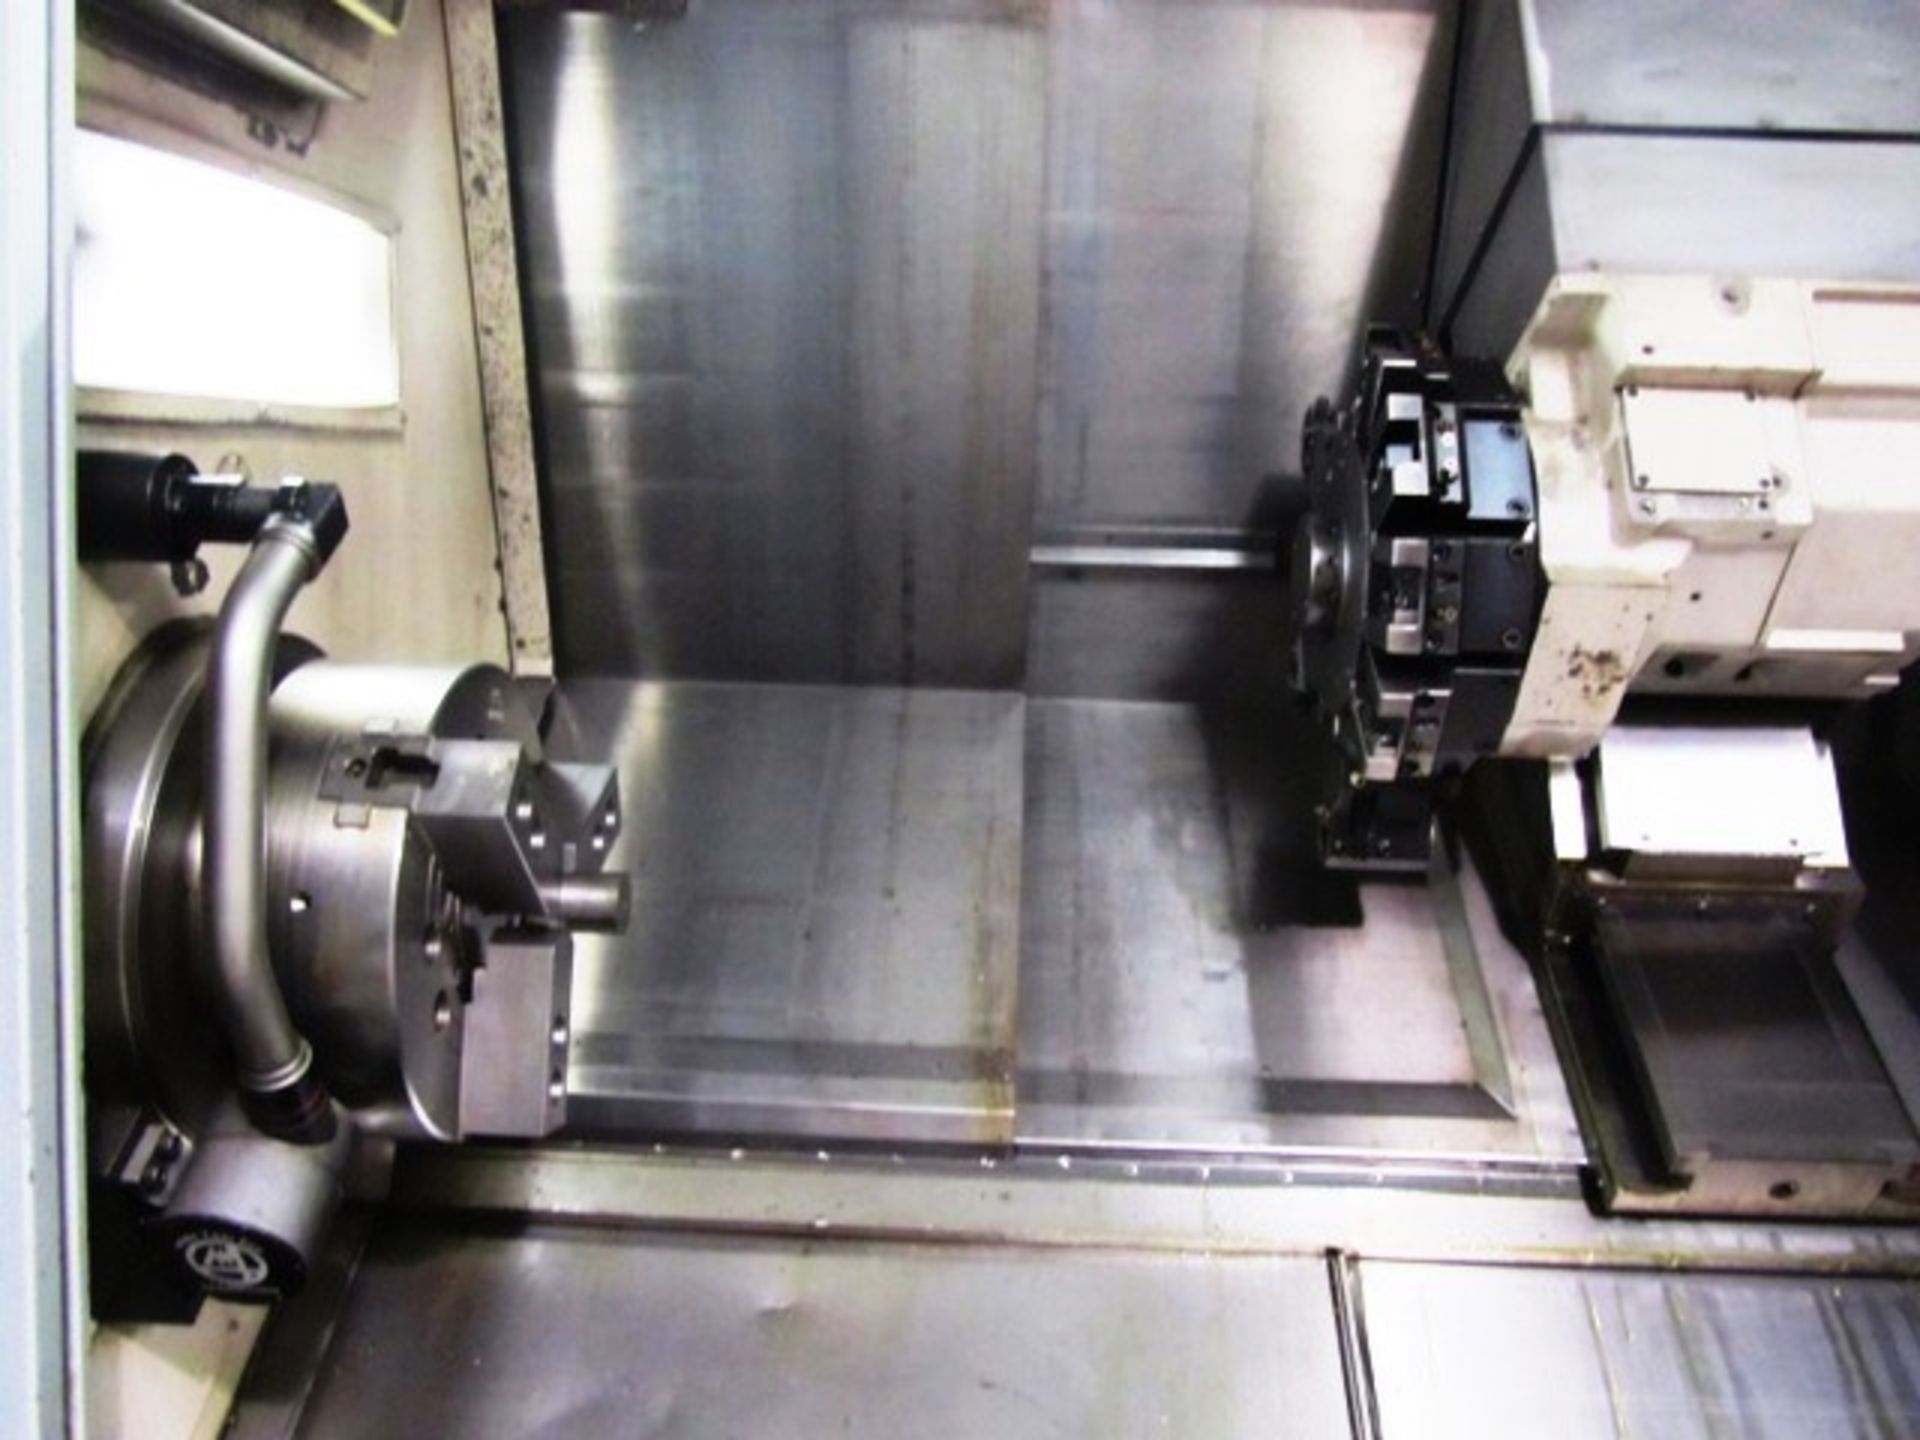 Okuma Space Turn Model LB4000EX - MY C1500 CNC Turning Center with Y-Axis, Milling, C-Axis, 15'' 3- - Image 2 of 6